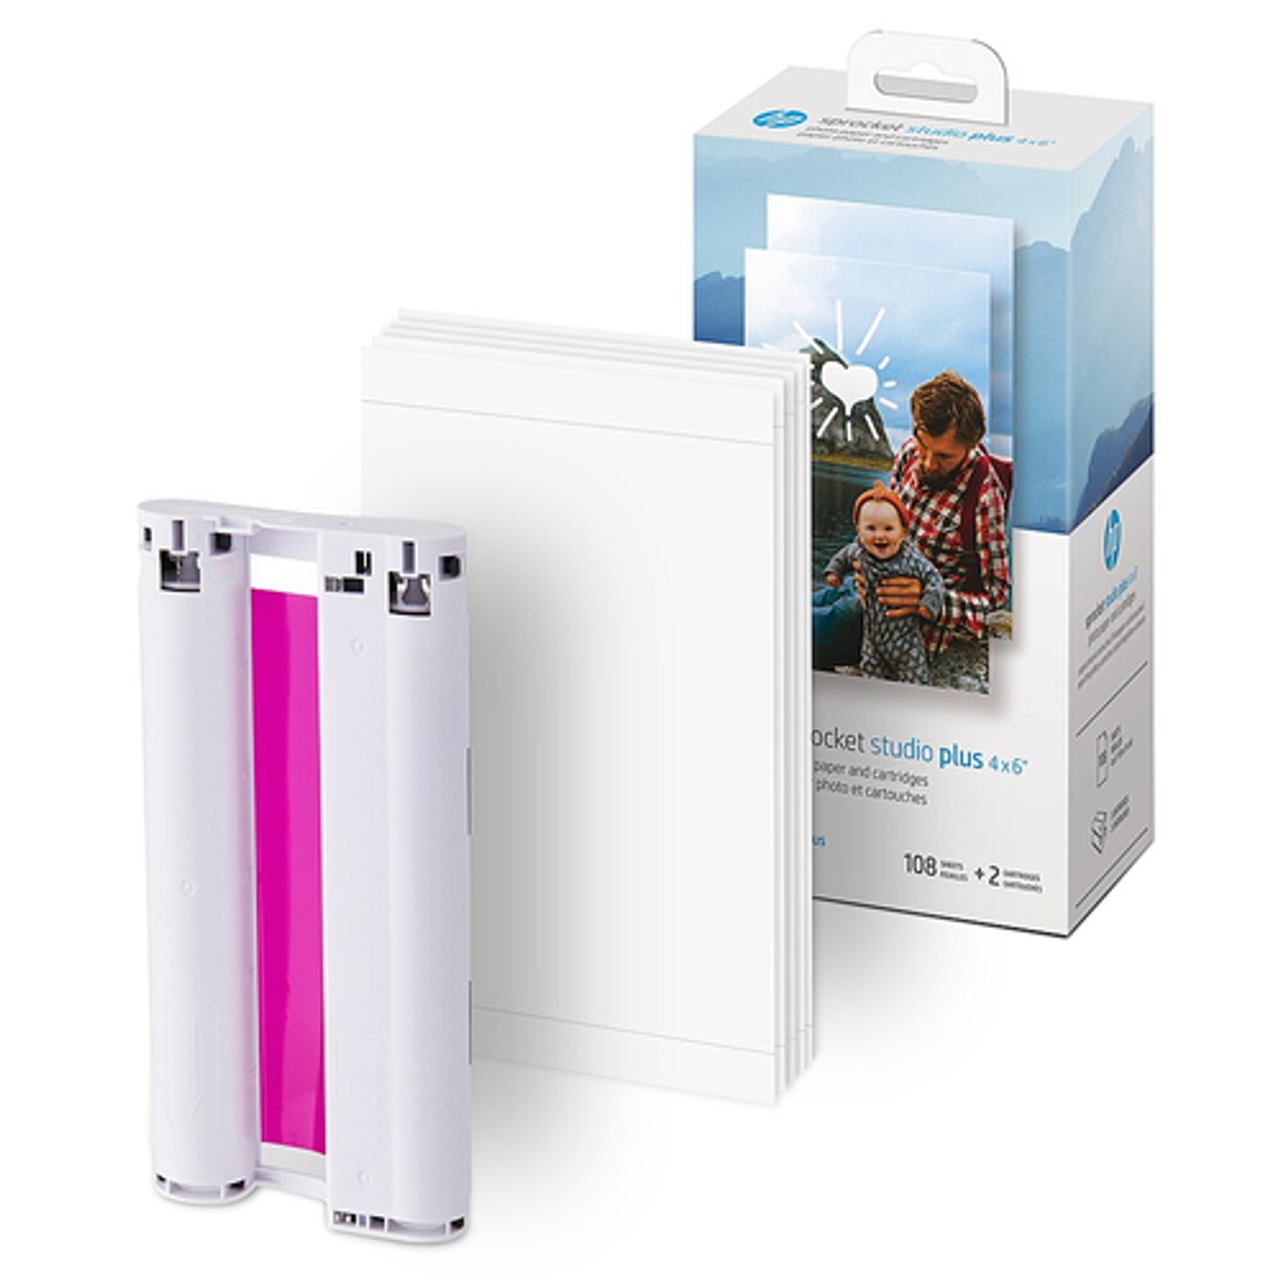 HP Sprocket Studio Plus 108 Sheets and 2 Cartridges for 4x6 prints - White